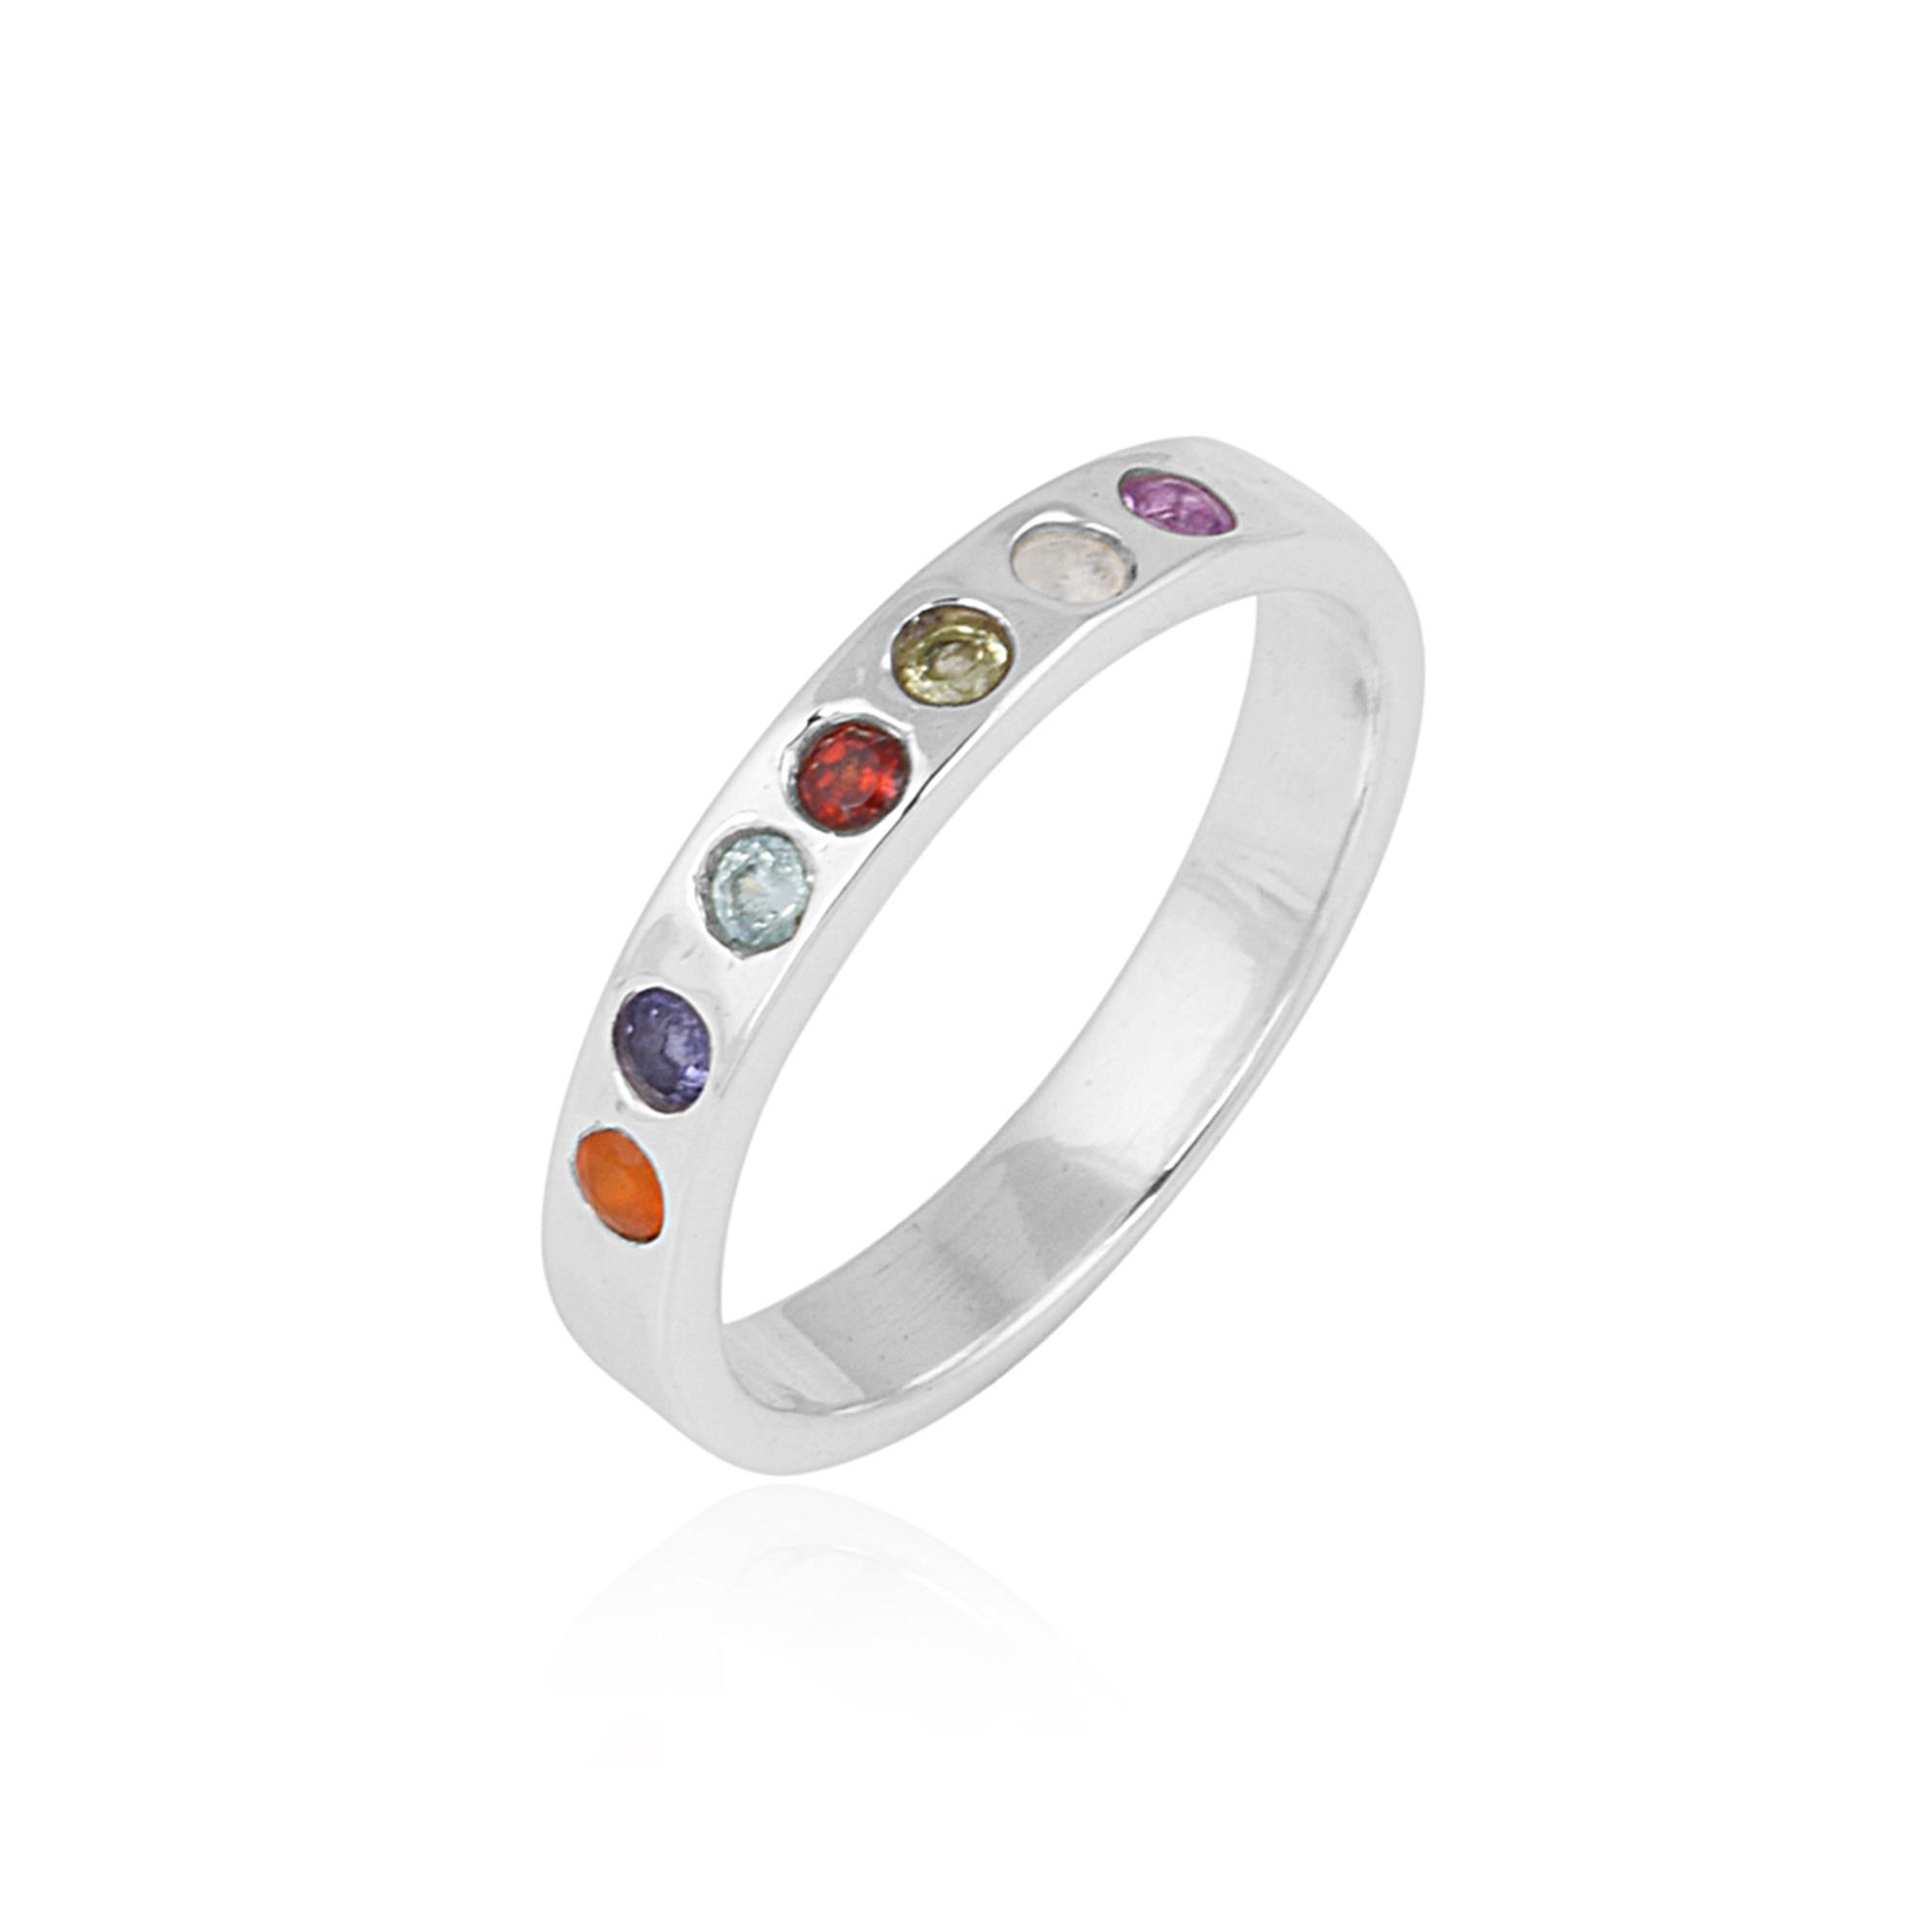 Chakra Multi-Stone ring in 925 Sterling Silver 